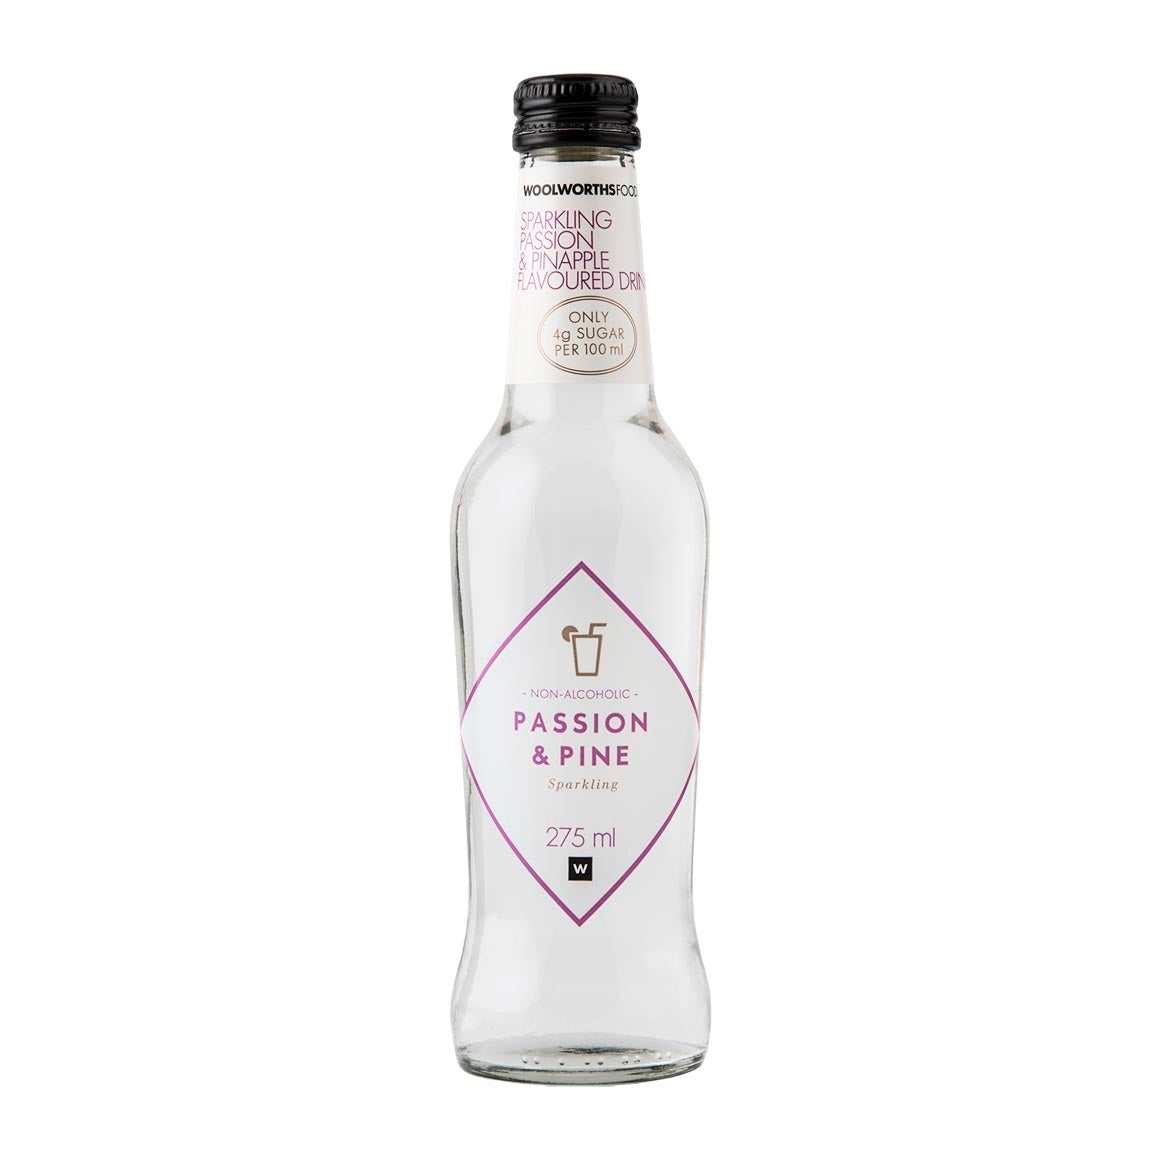 WOOLWORTHS PASSION PINE SPARKLING DRINK 275ML